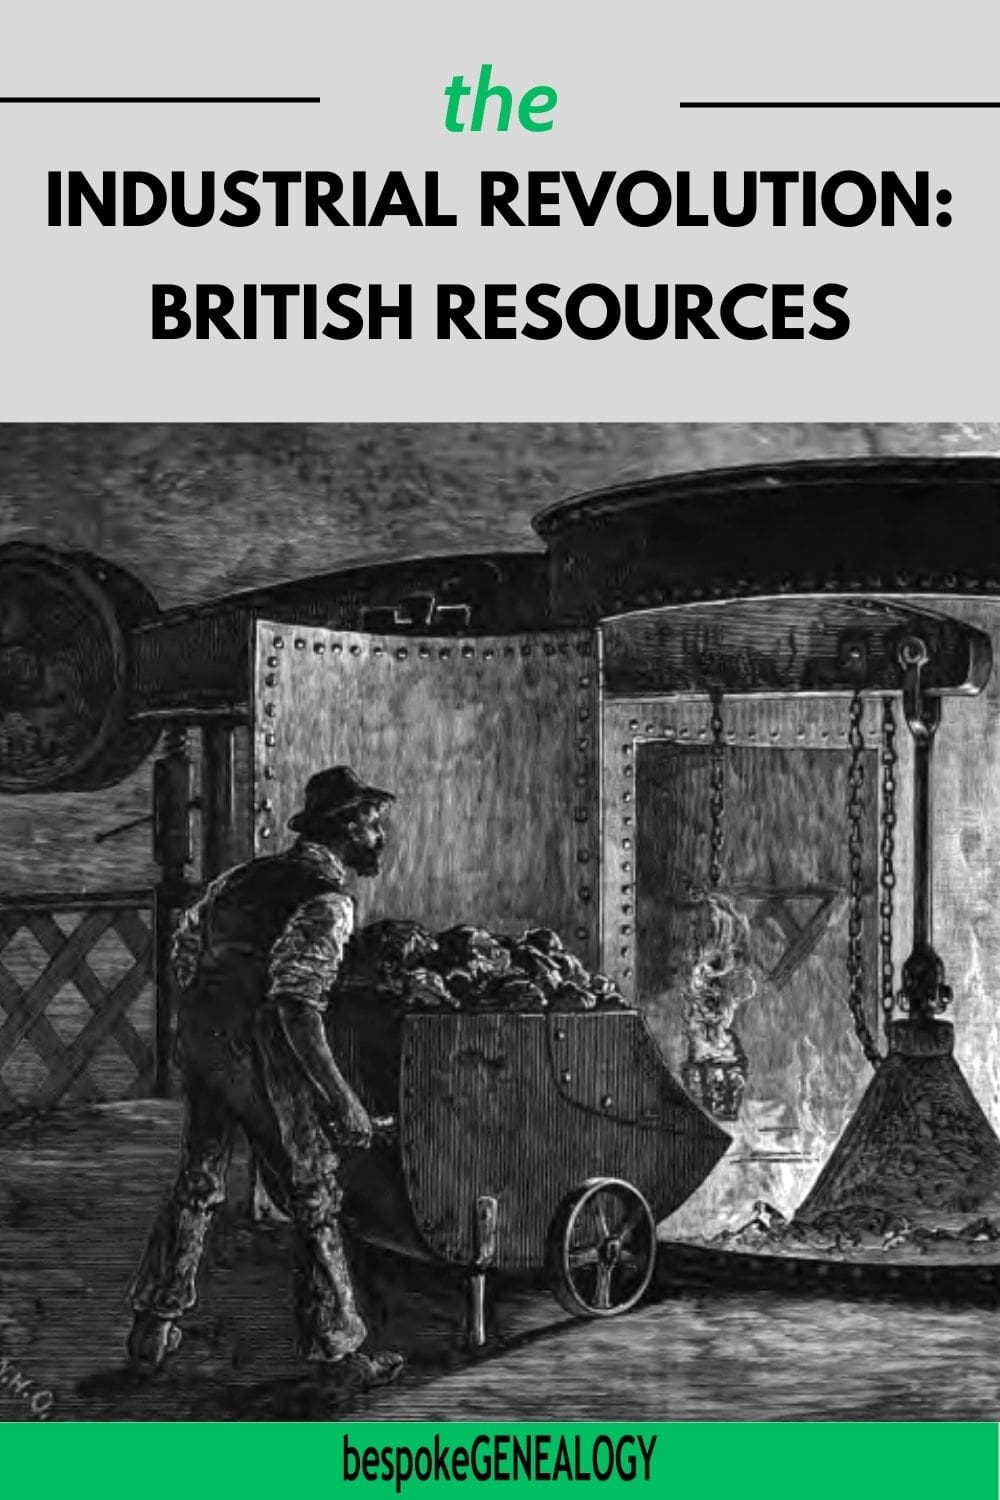 Pinterest pin. The Industrial Revolution. British resources. Picture of a man with a barrow loading ore into a furnace